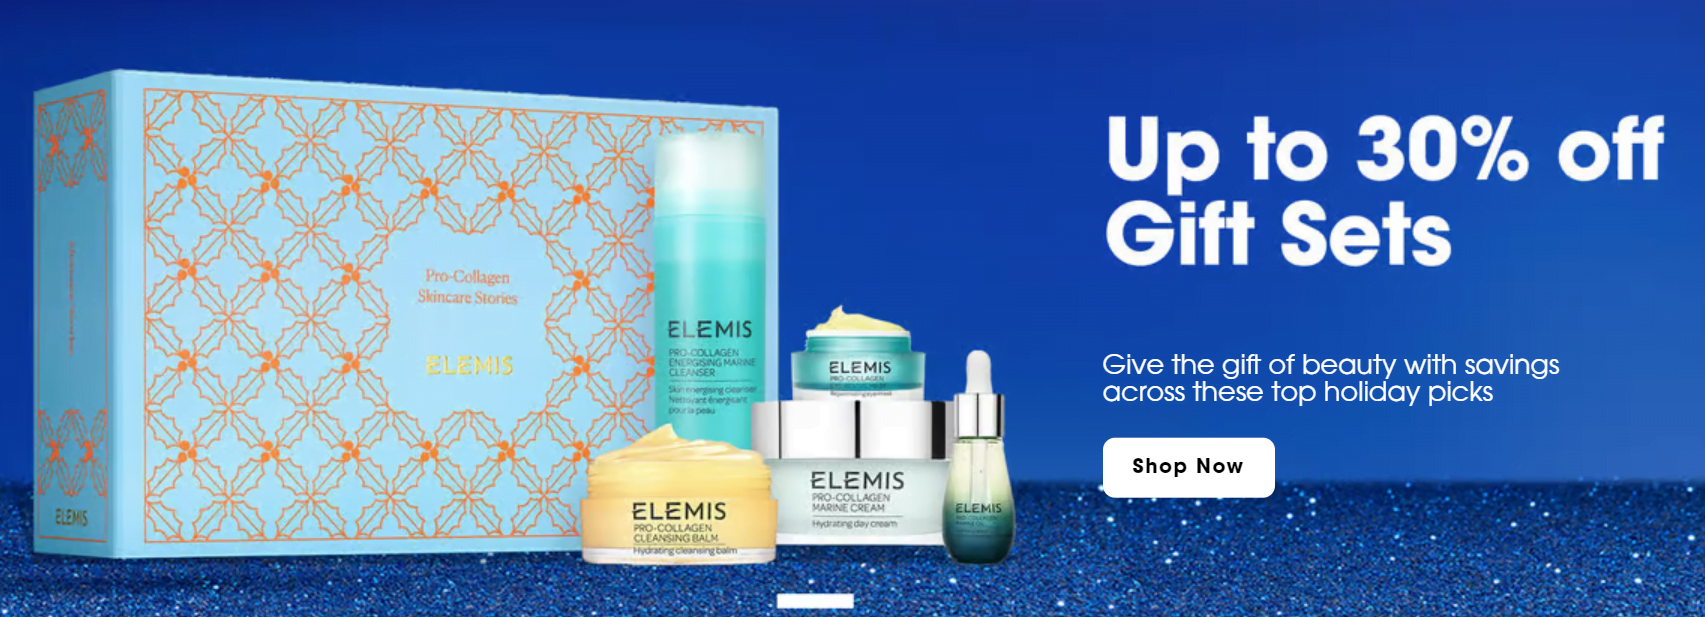 Up to 30% off Gift Sets at Sephora UK